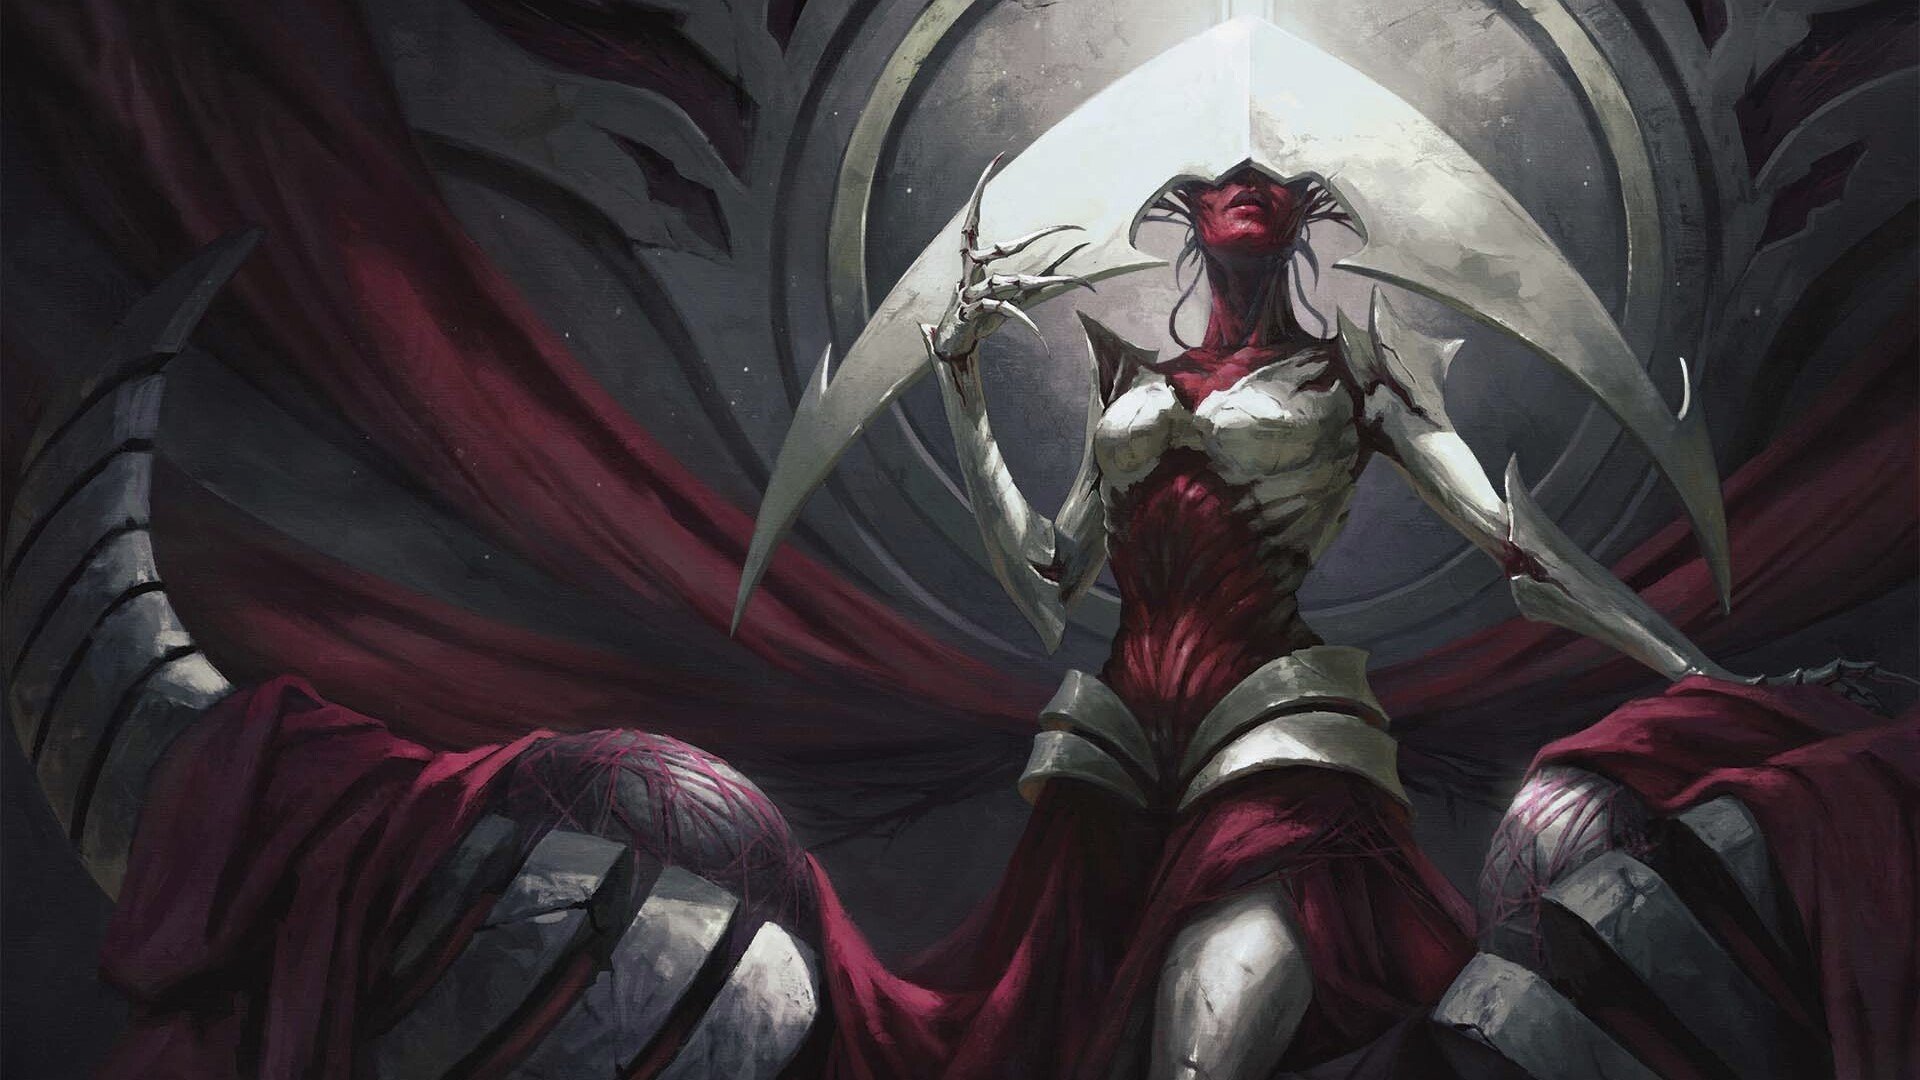 Magic the Gathering: An image of the Praetor Elesh Norn from the MTG set Phyrexia: All Will Be One